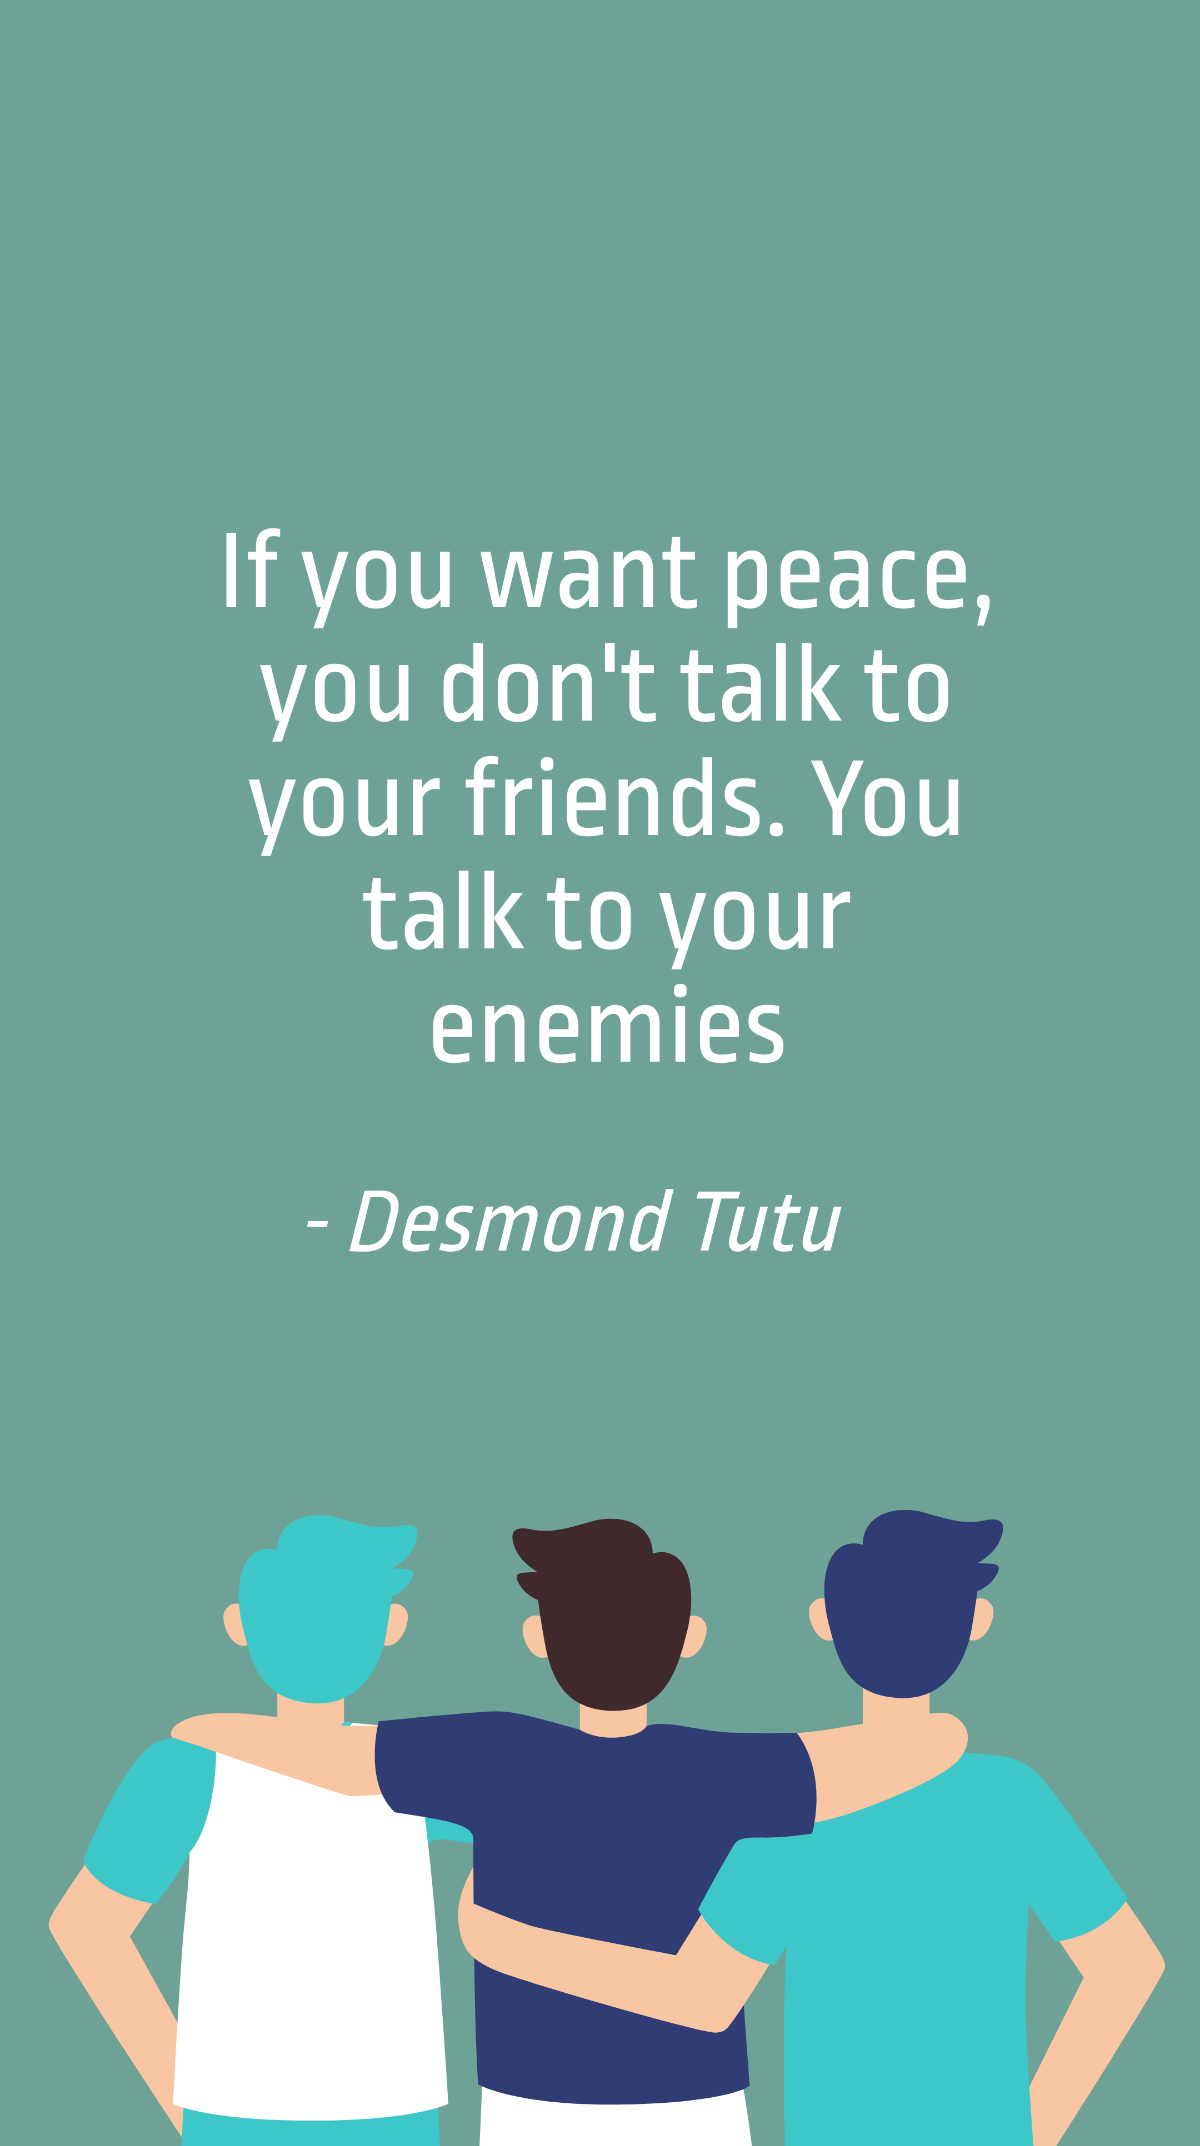 Desmond Tutu - If you want peace, you don't talk to your friends. You talk to your enemies